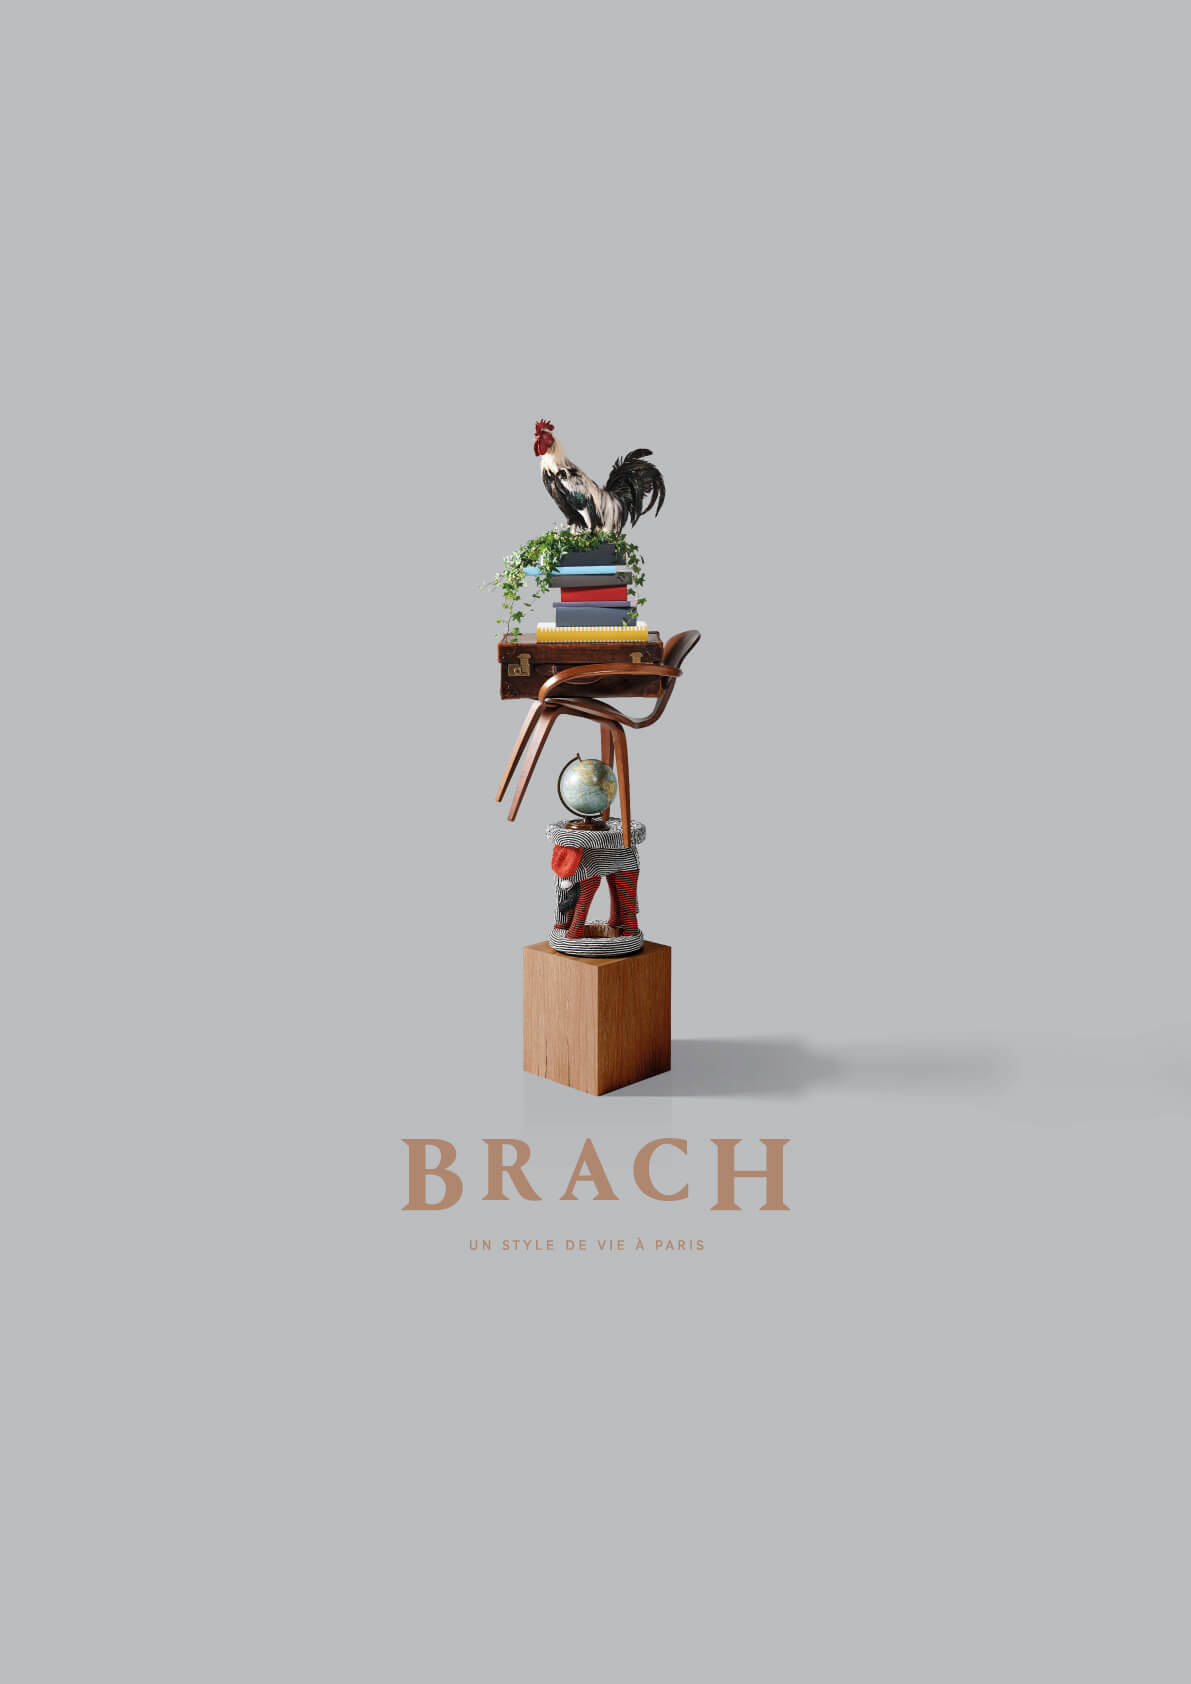 BRACH, A PLACE OF UNIQUE LIFE AND CULTURE WHERE POETIC MYSTERIES AND FERTILE SURPRISES FEED THE IMAGINATION